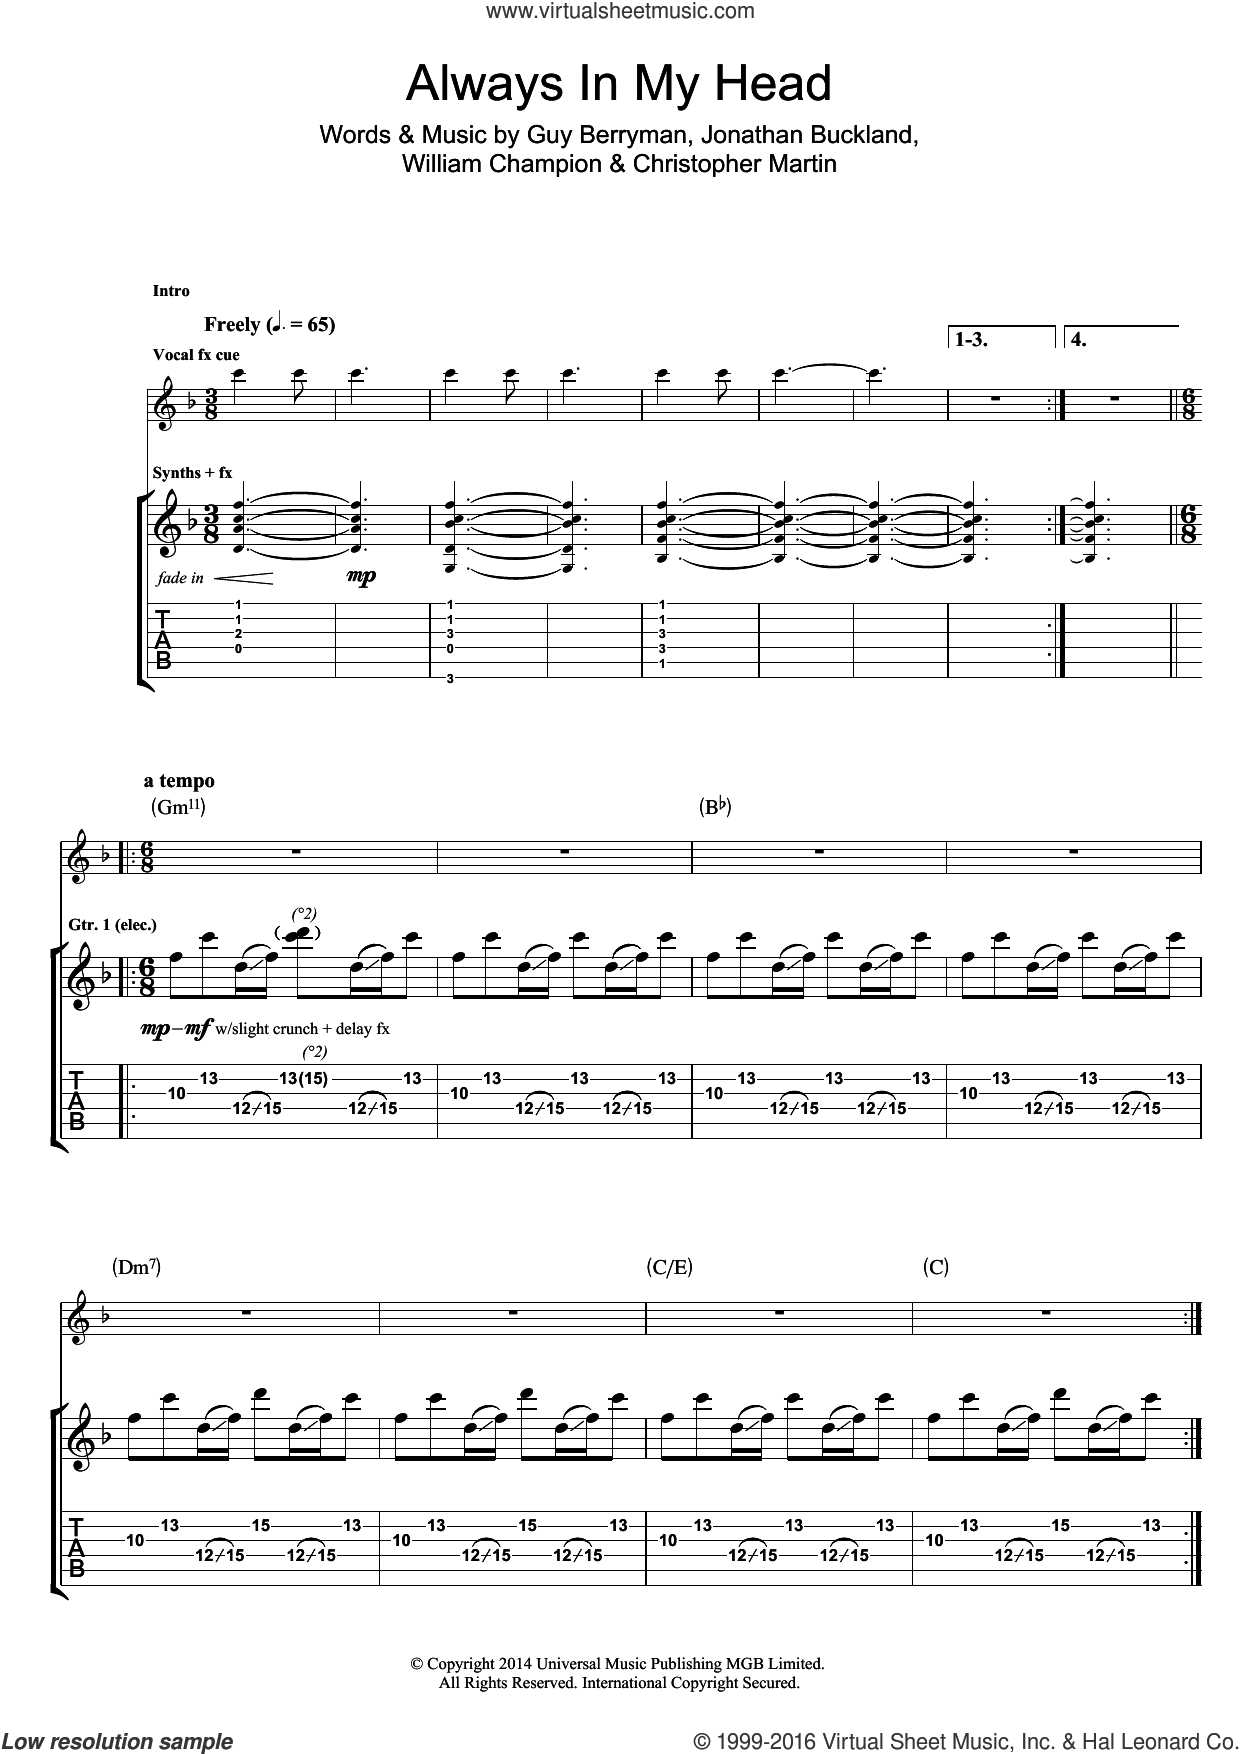 Coldplay - Always In My Head sheet music for guitar (tablature)